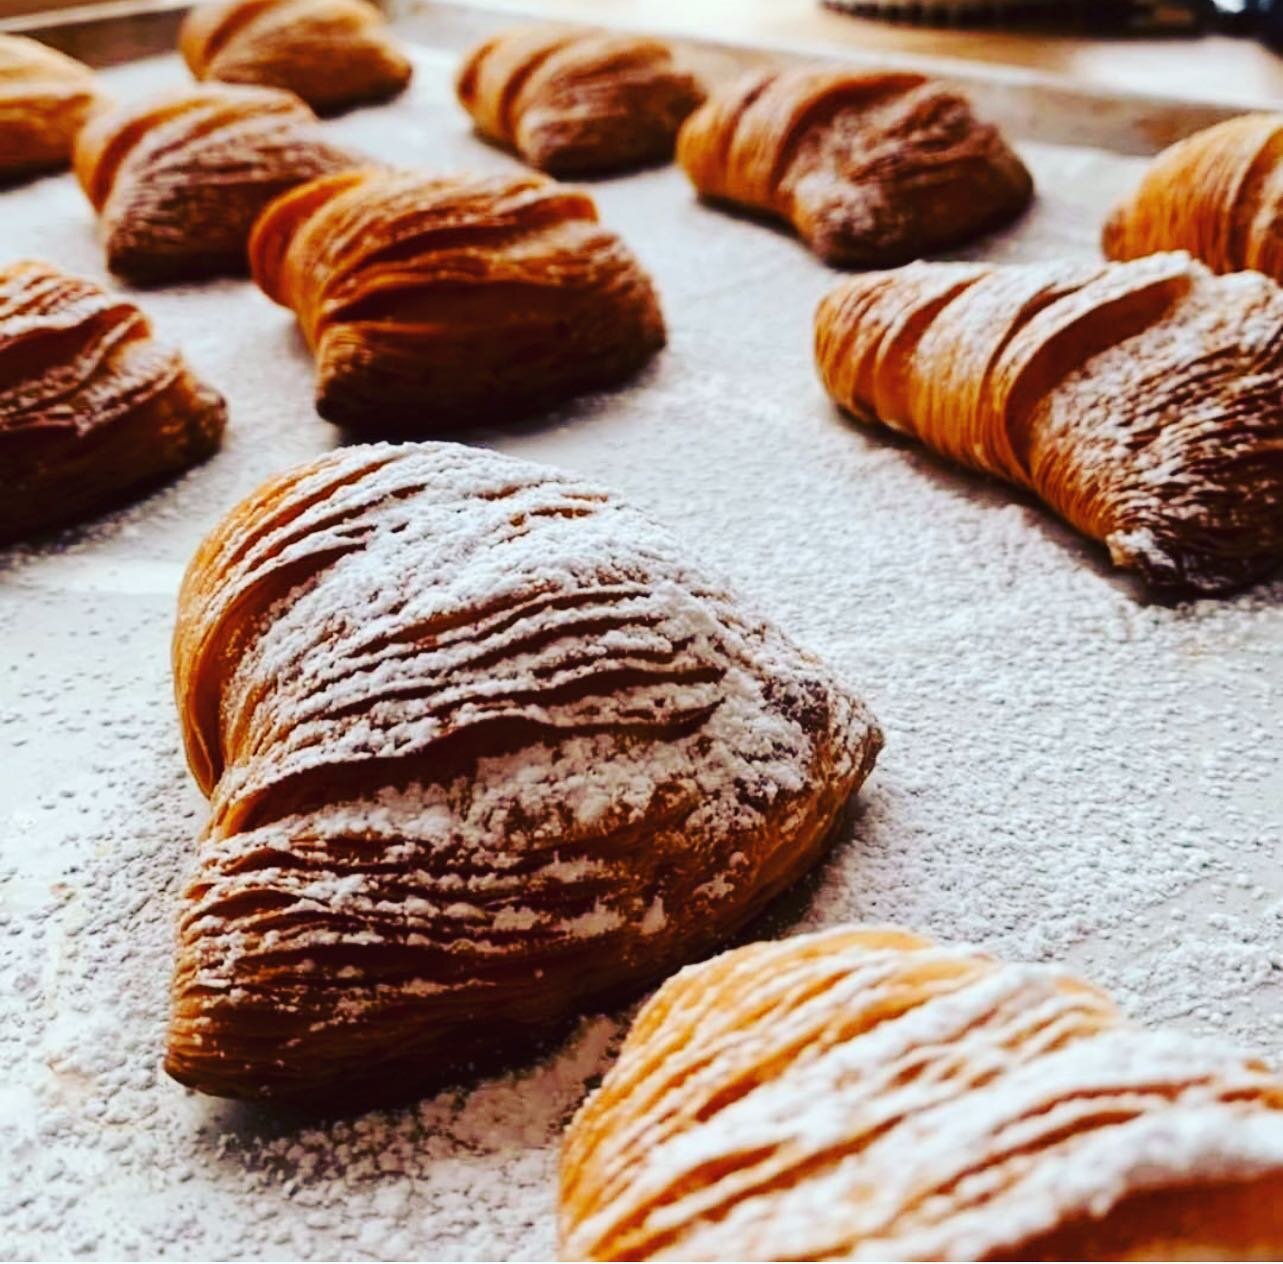 One of my favorites!  Might be harder to make than a croissant, but so worth the time.  Sfogliatella means &quot;small, thin leaf/layer&quot;, as the pastry's texture resembles stacked leaves.